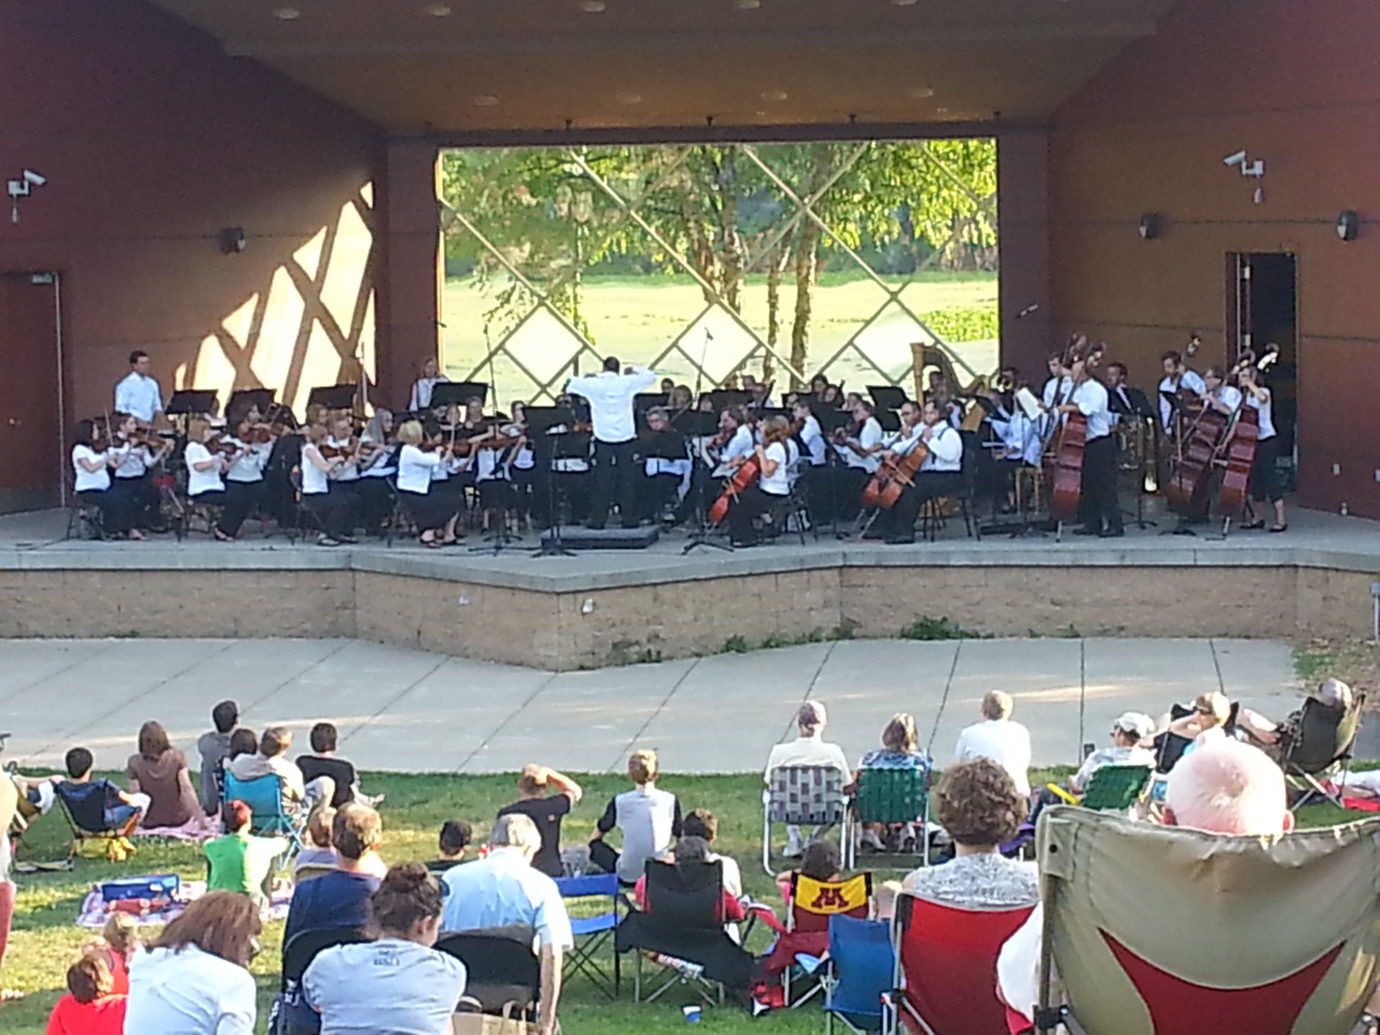 Bloomington Symphony onstage at the Normandale Lake Bandshell